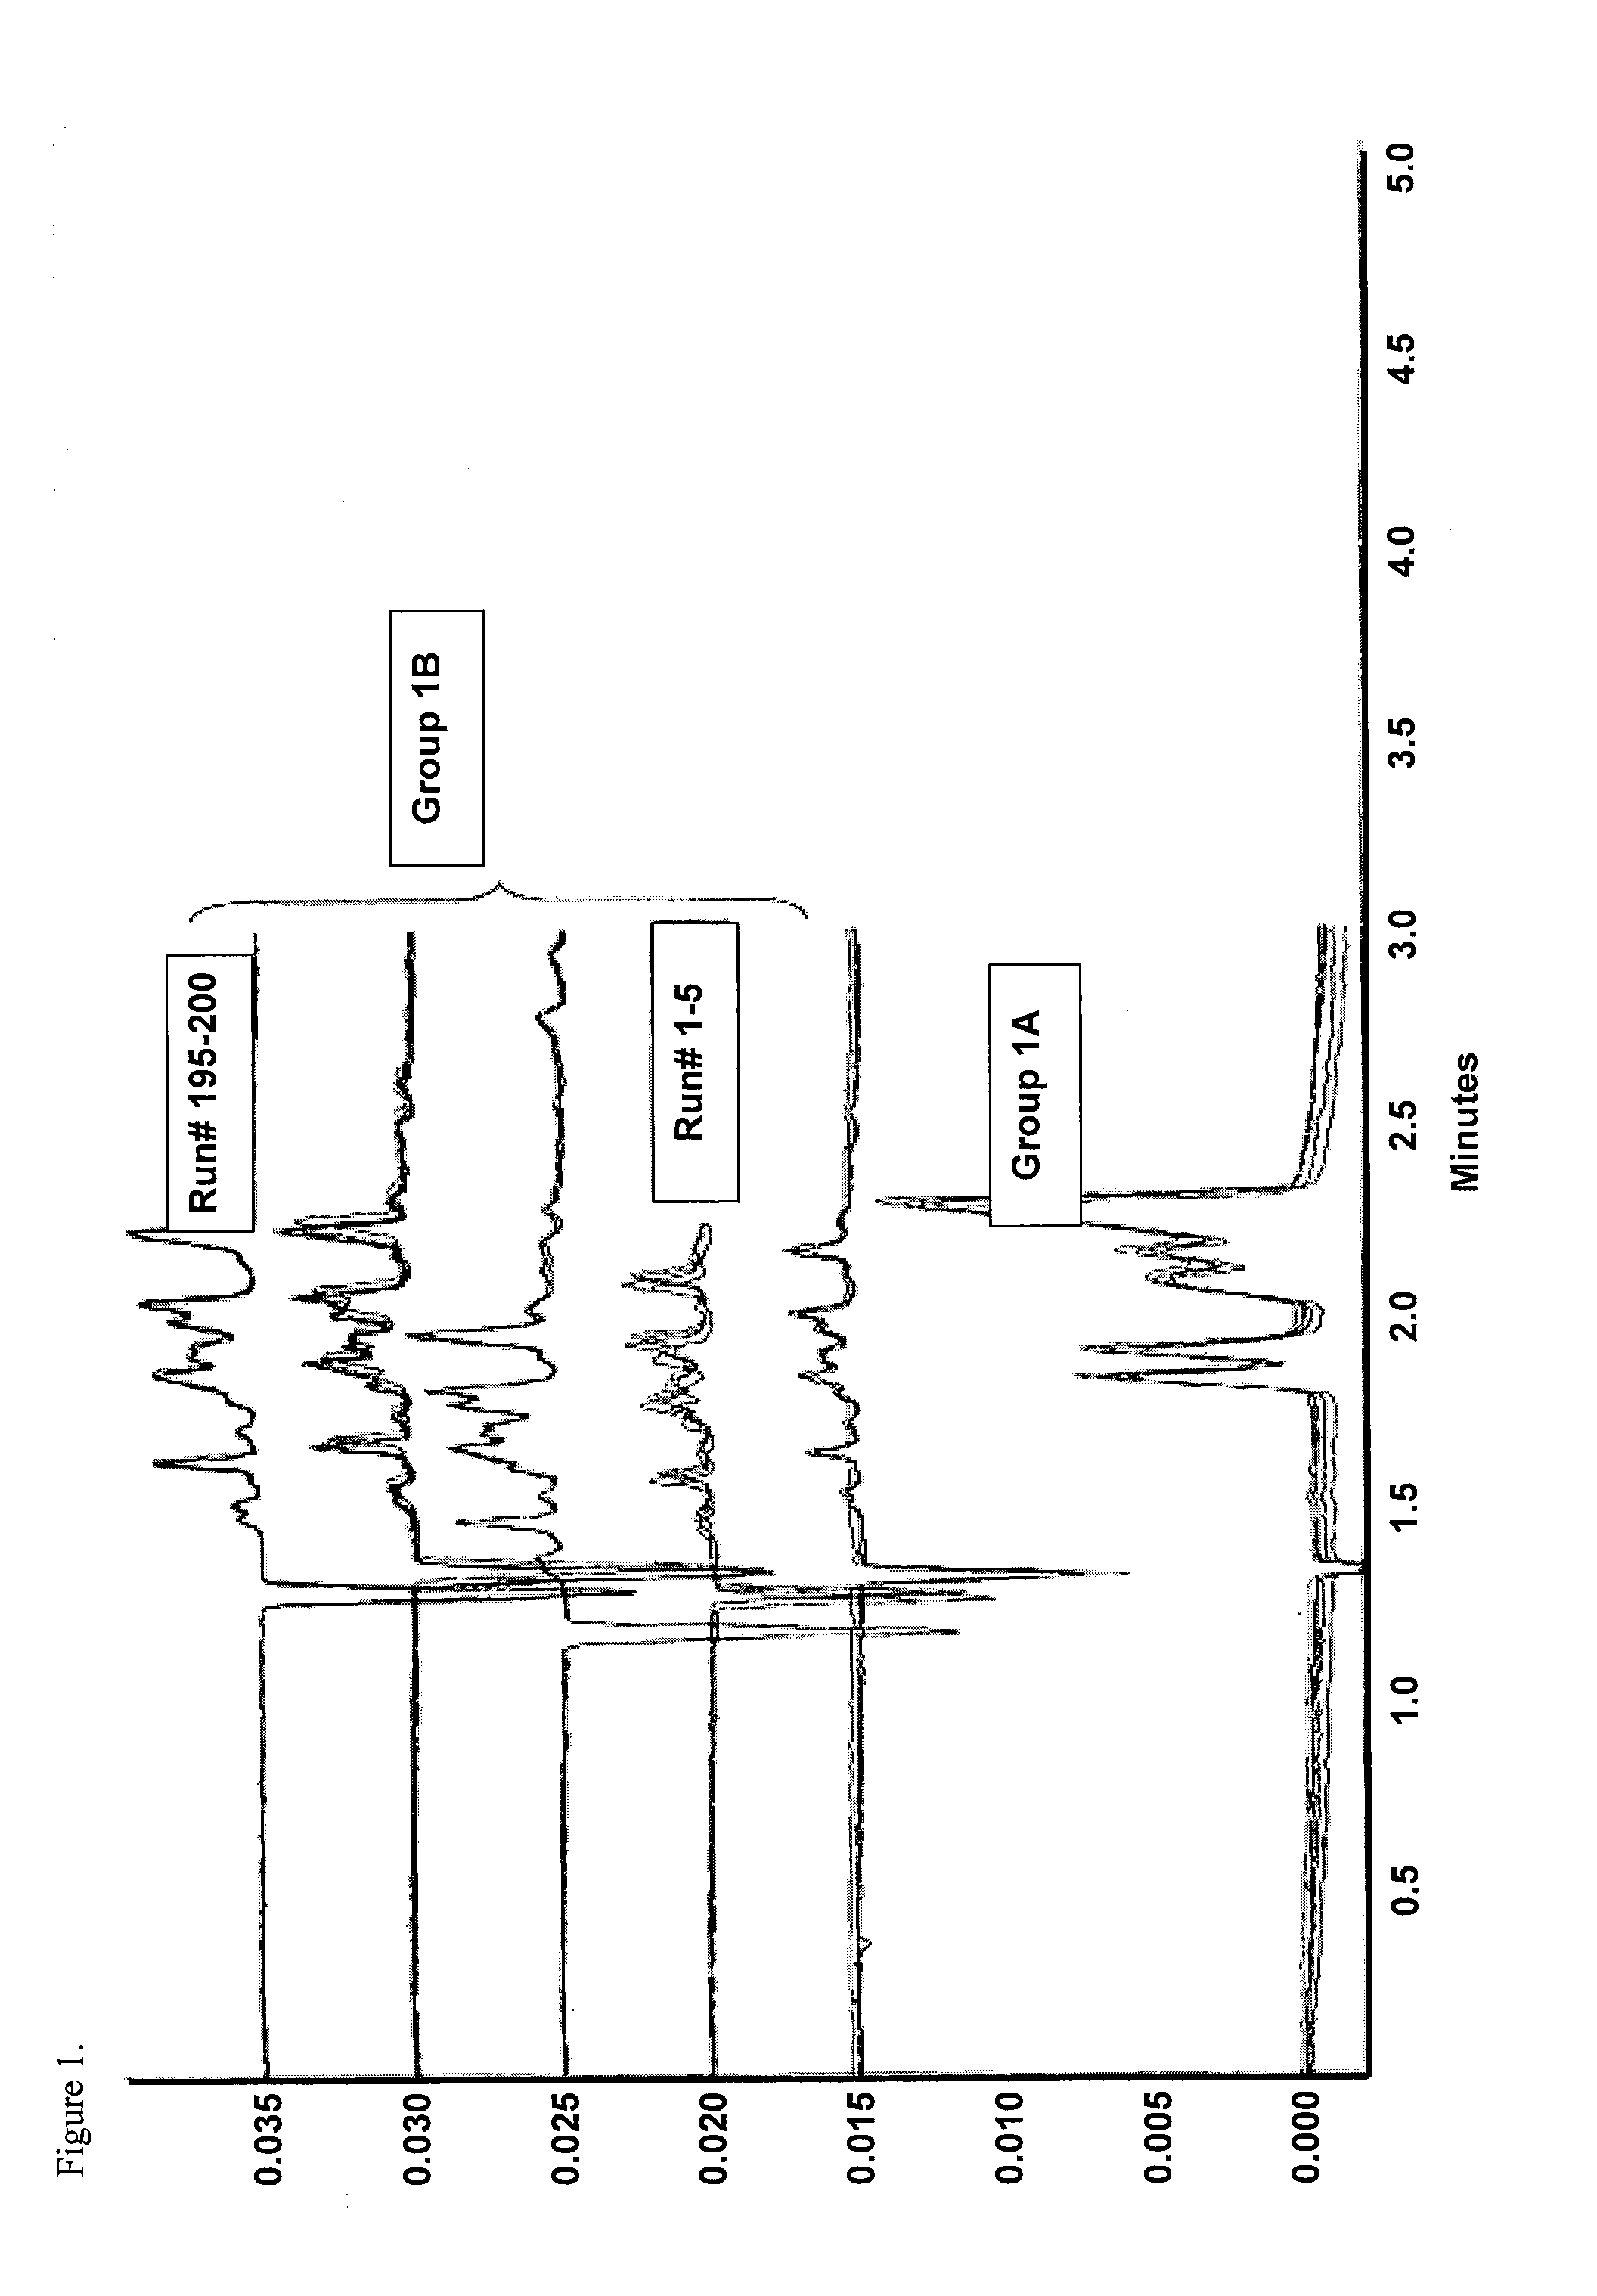 Coated Capillary Electrophoresis Tubes and System